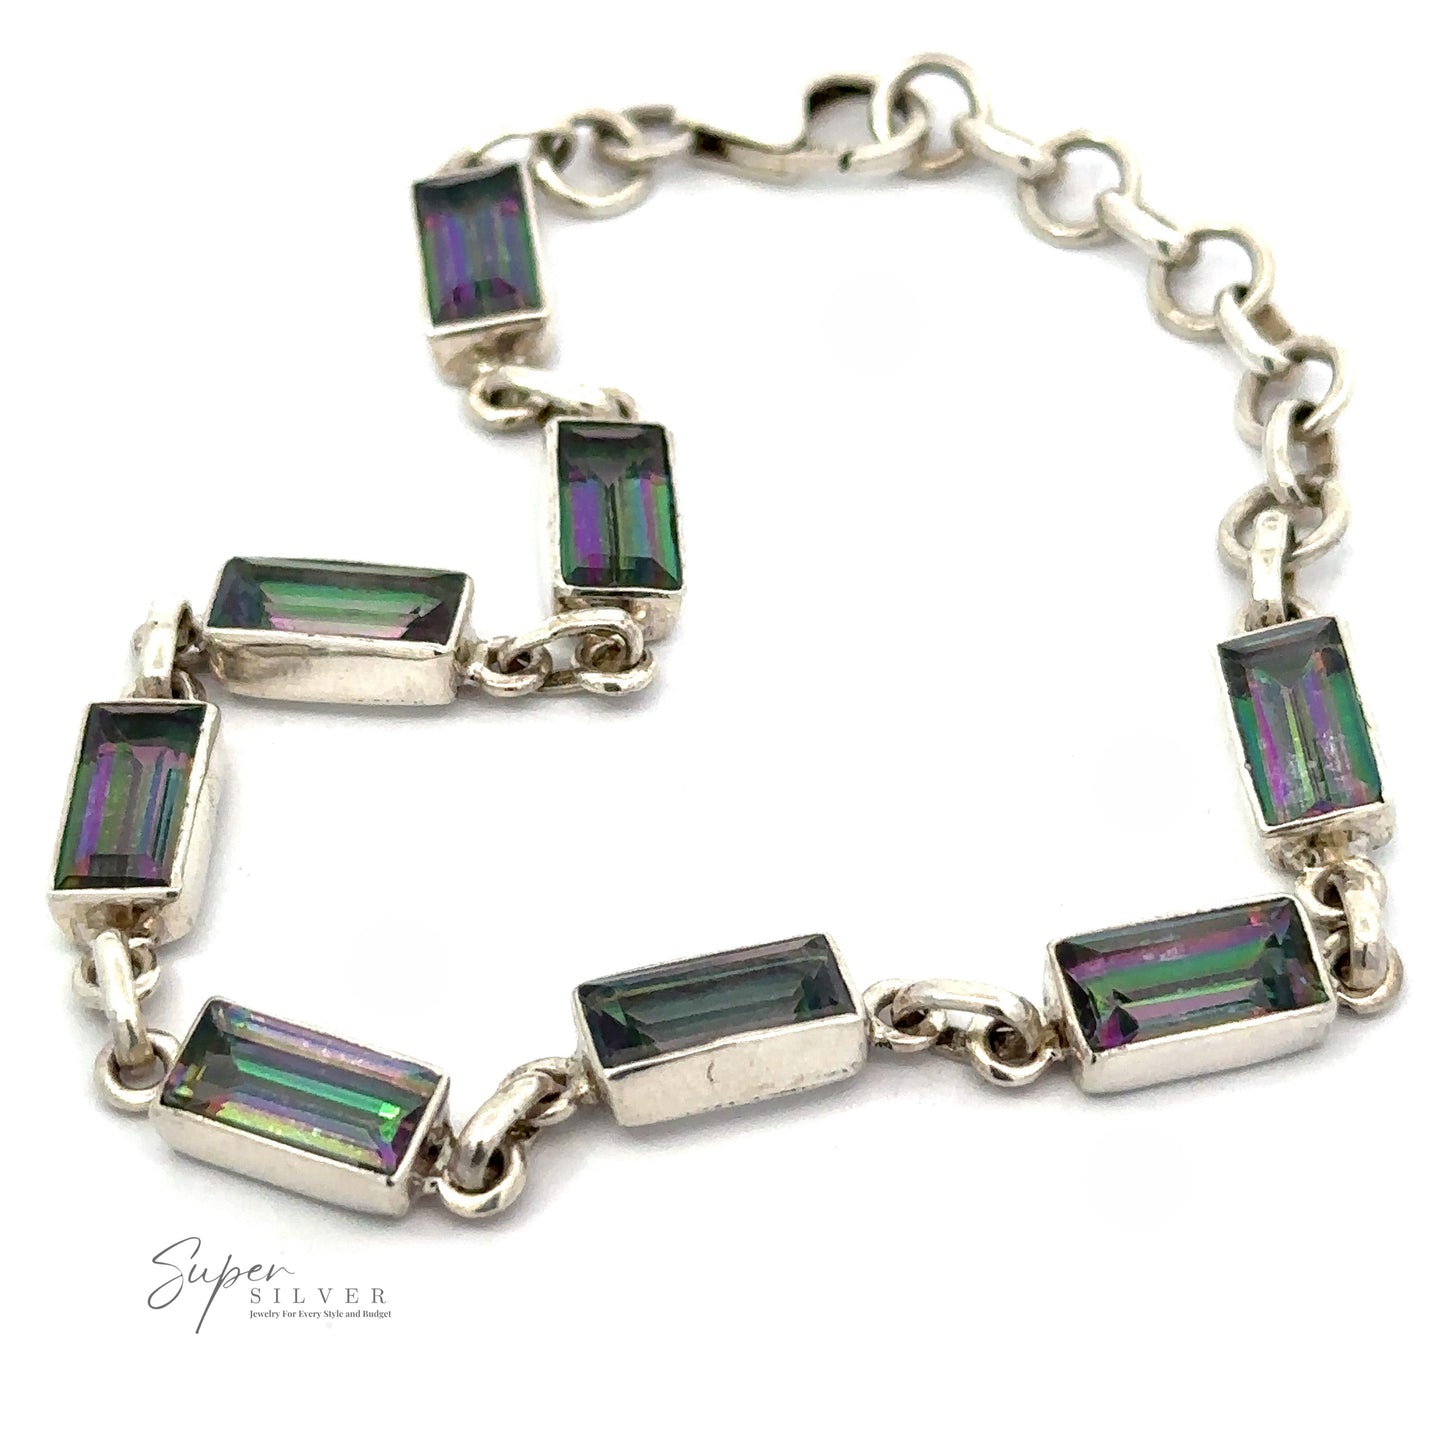 A Rectangle Rainbow Mystic Topaz Bracelet featuring rectangular, multi-colored gemstone links connected by small silver rings. The bracelet has a clasp closure, perfect for any occasion. The brand "Super Silver" is visible in the bottom-left corner.